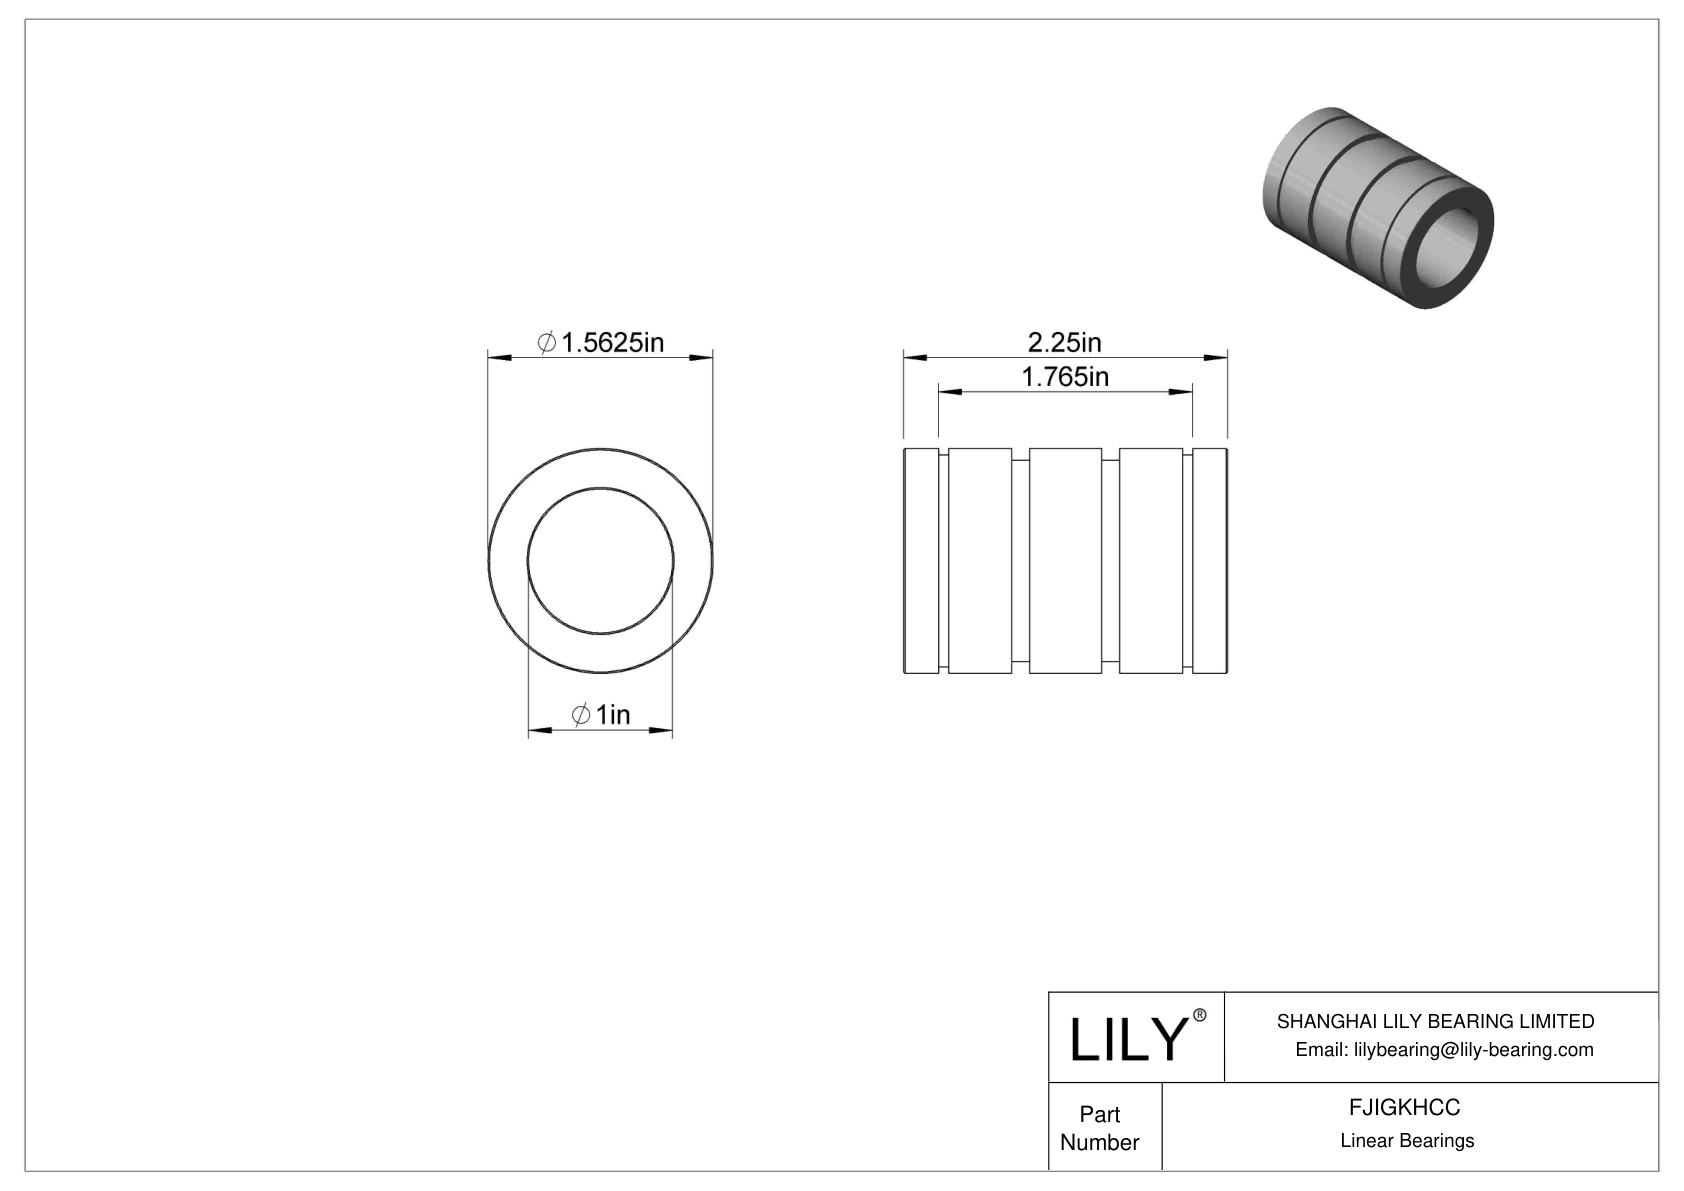 FJIGKHCC Common Linear Sleeve Bearings cad drawing